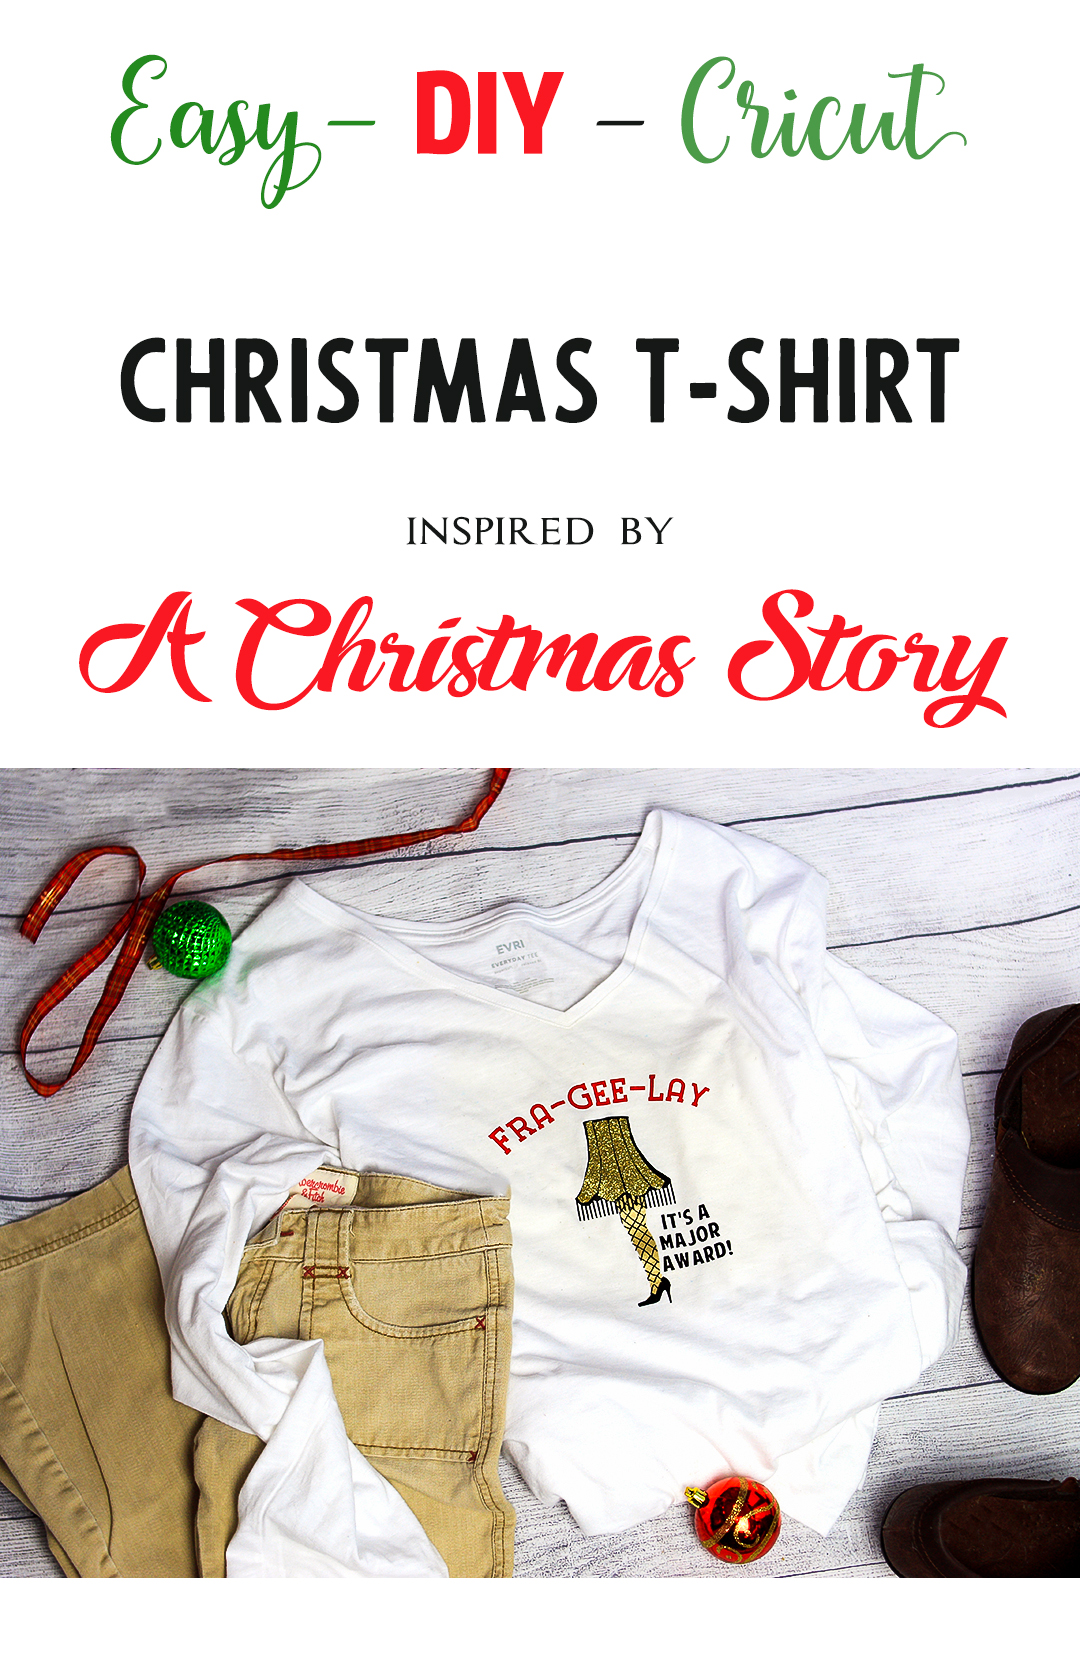 if you love the holidays and the classic movie, a christmas story, then you're going to love this easy christmas shirt i'm sharing today. be sure to check out the other cricut diy christmas shirt designs too!